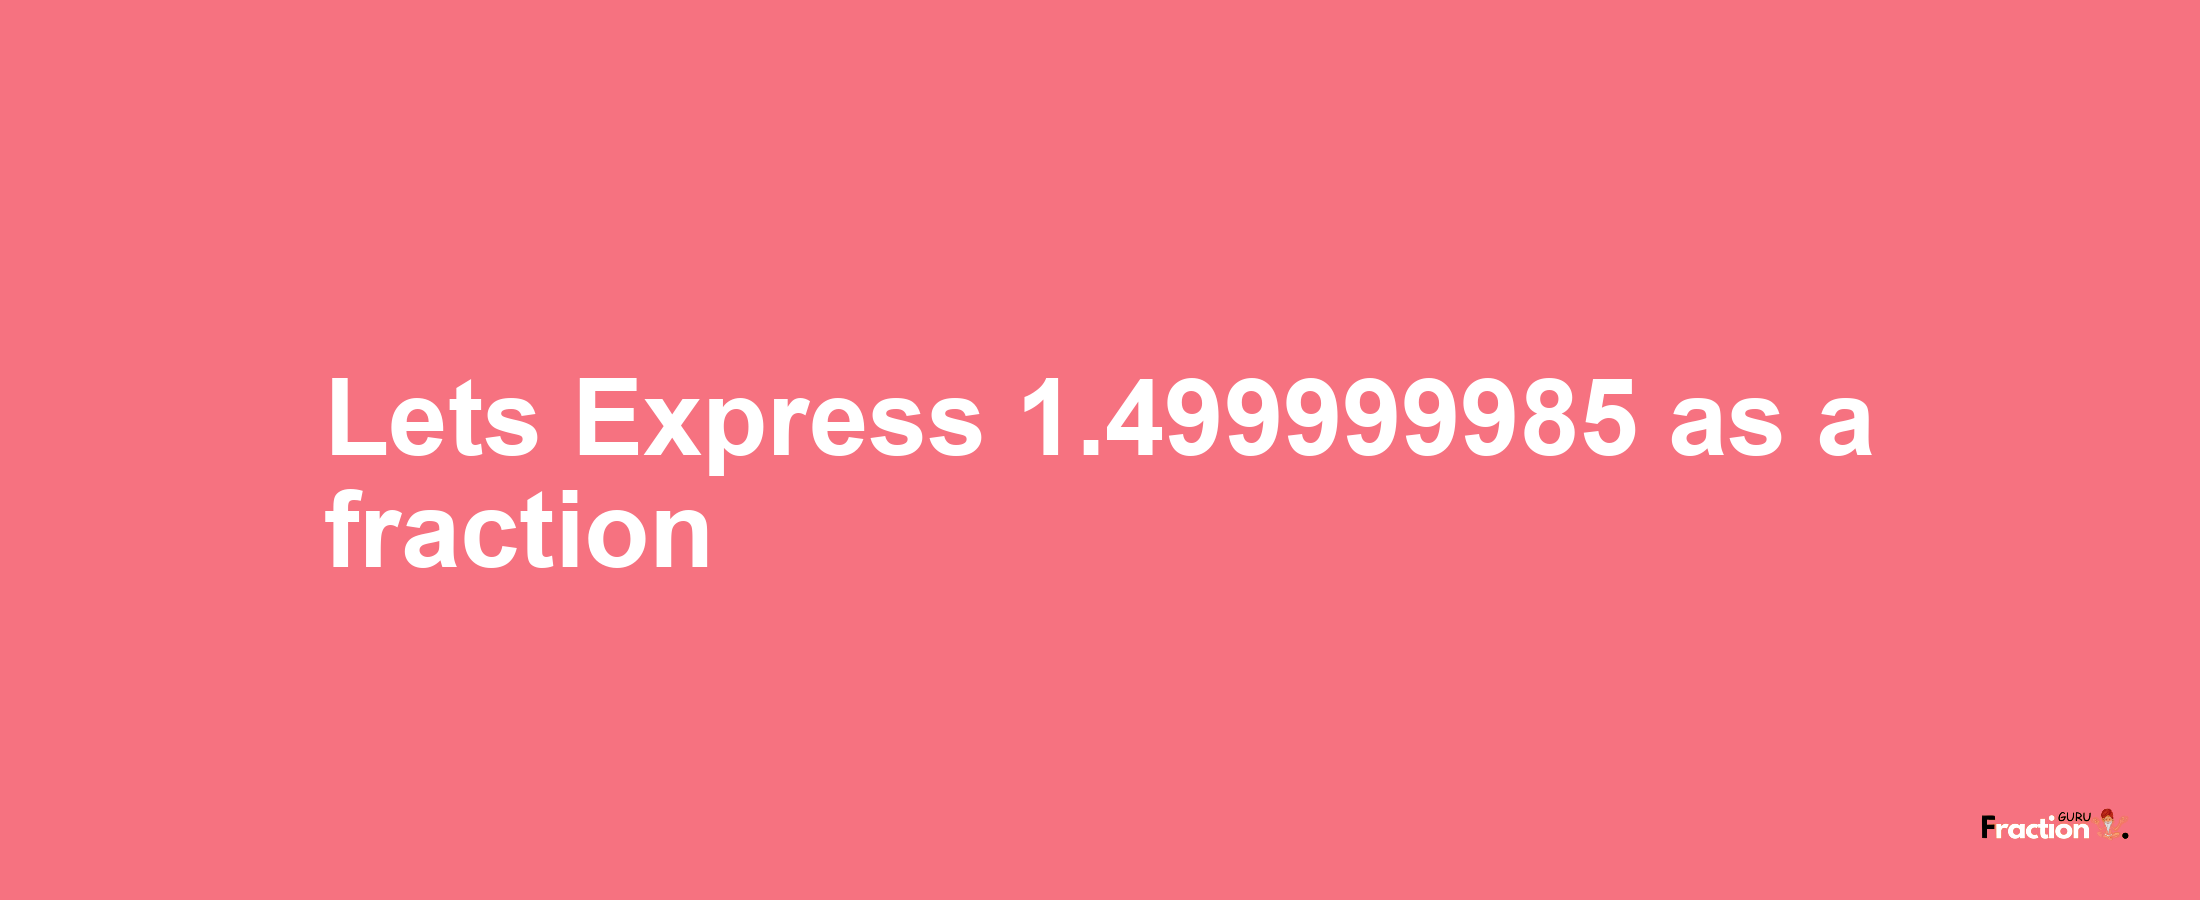 Lets Express 1.499999985 as afraction